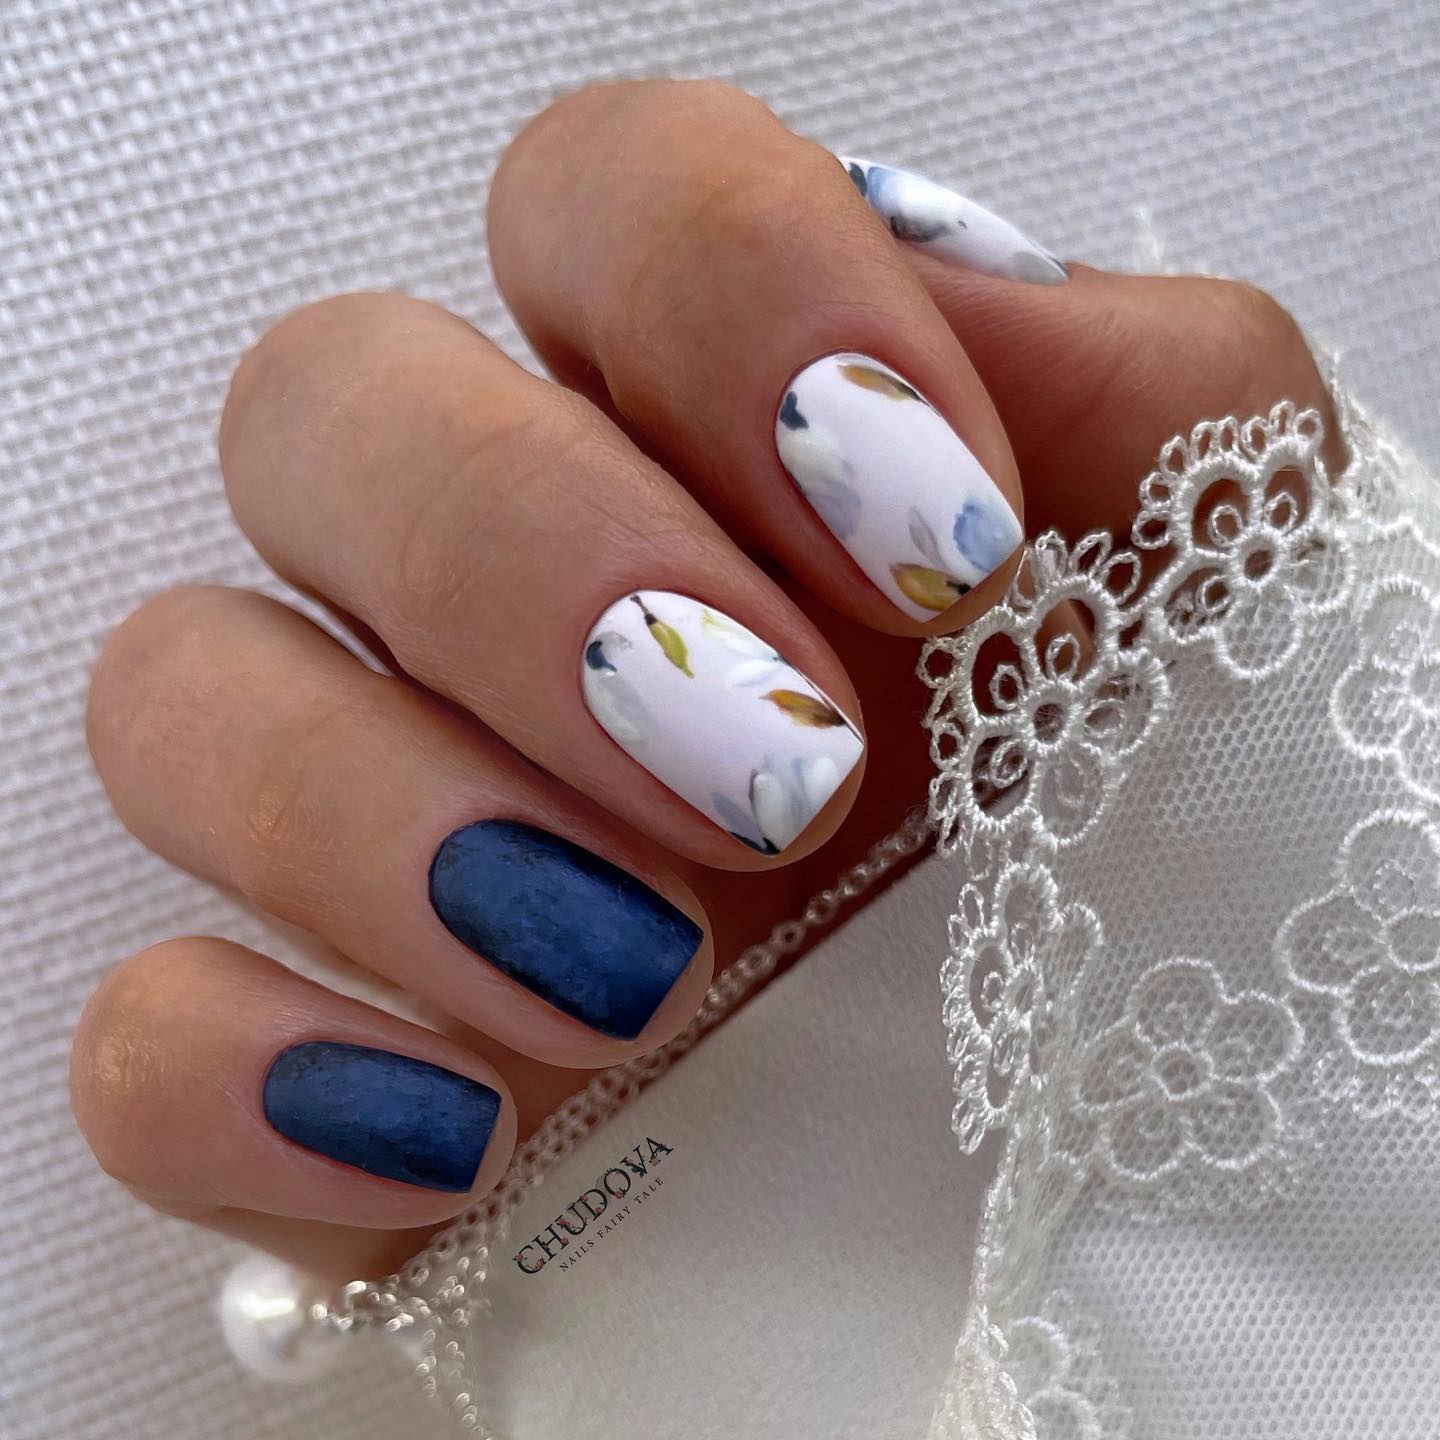 Short Blue and White Nails with Leaf Design